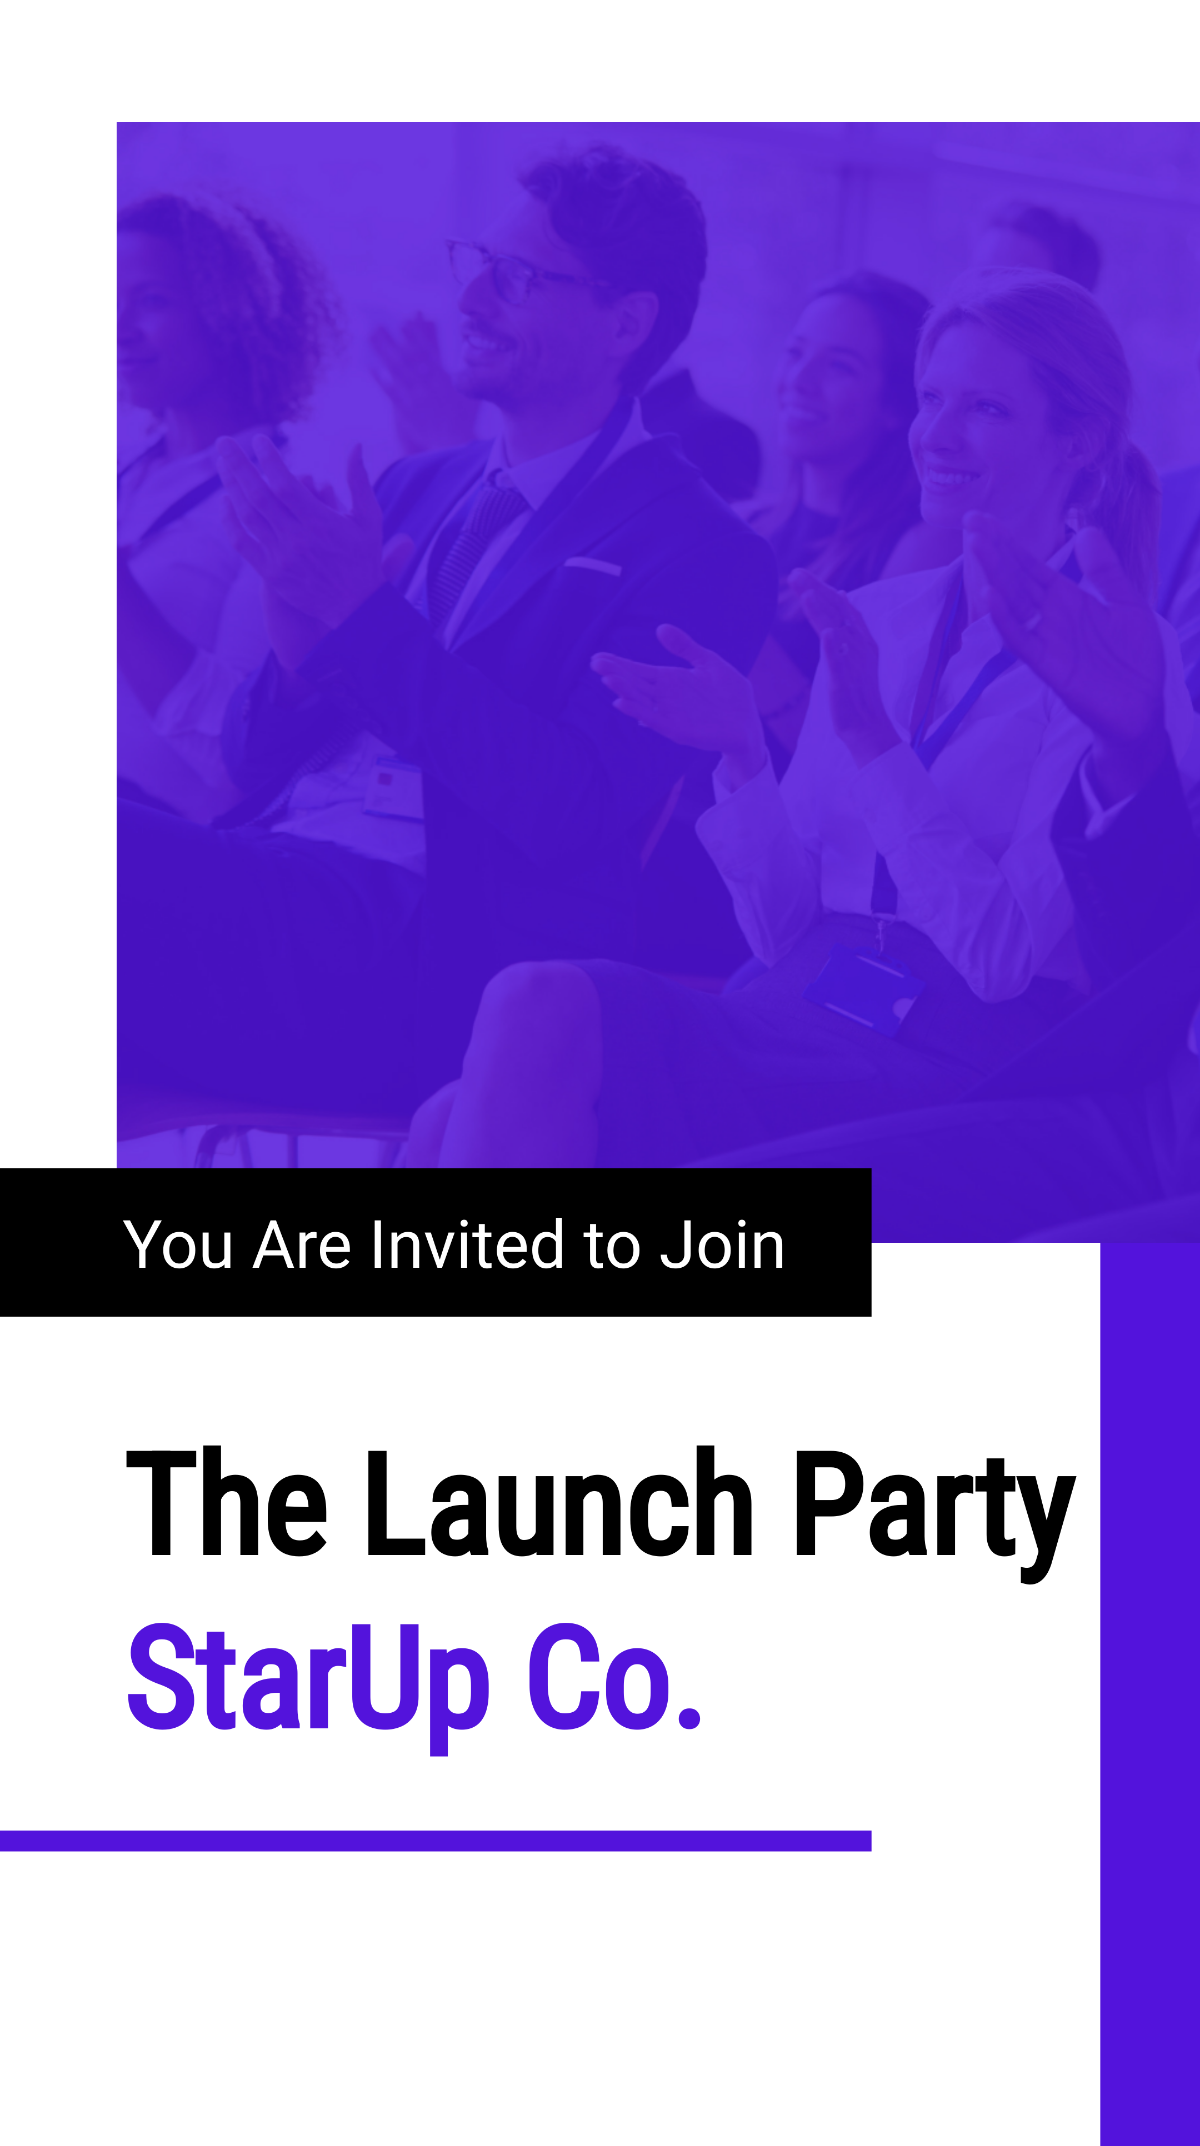 Startup Launch Party Whatsapp Post Template